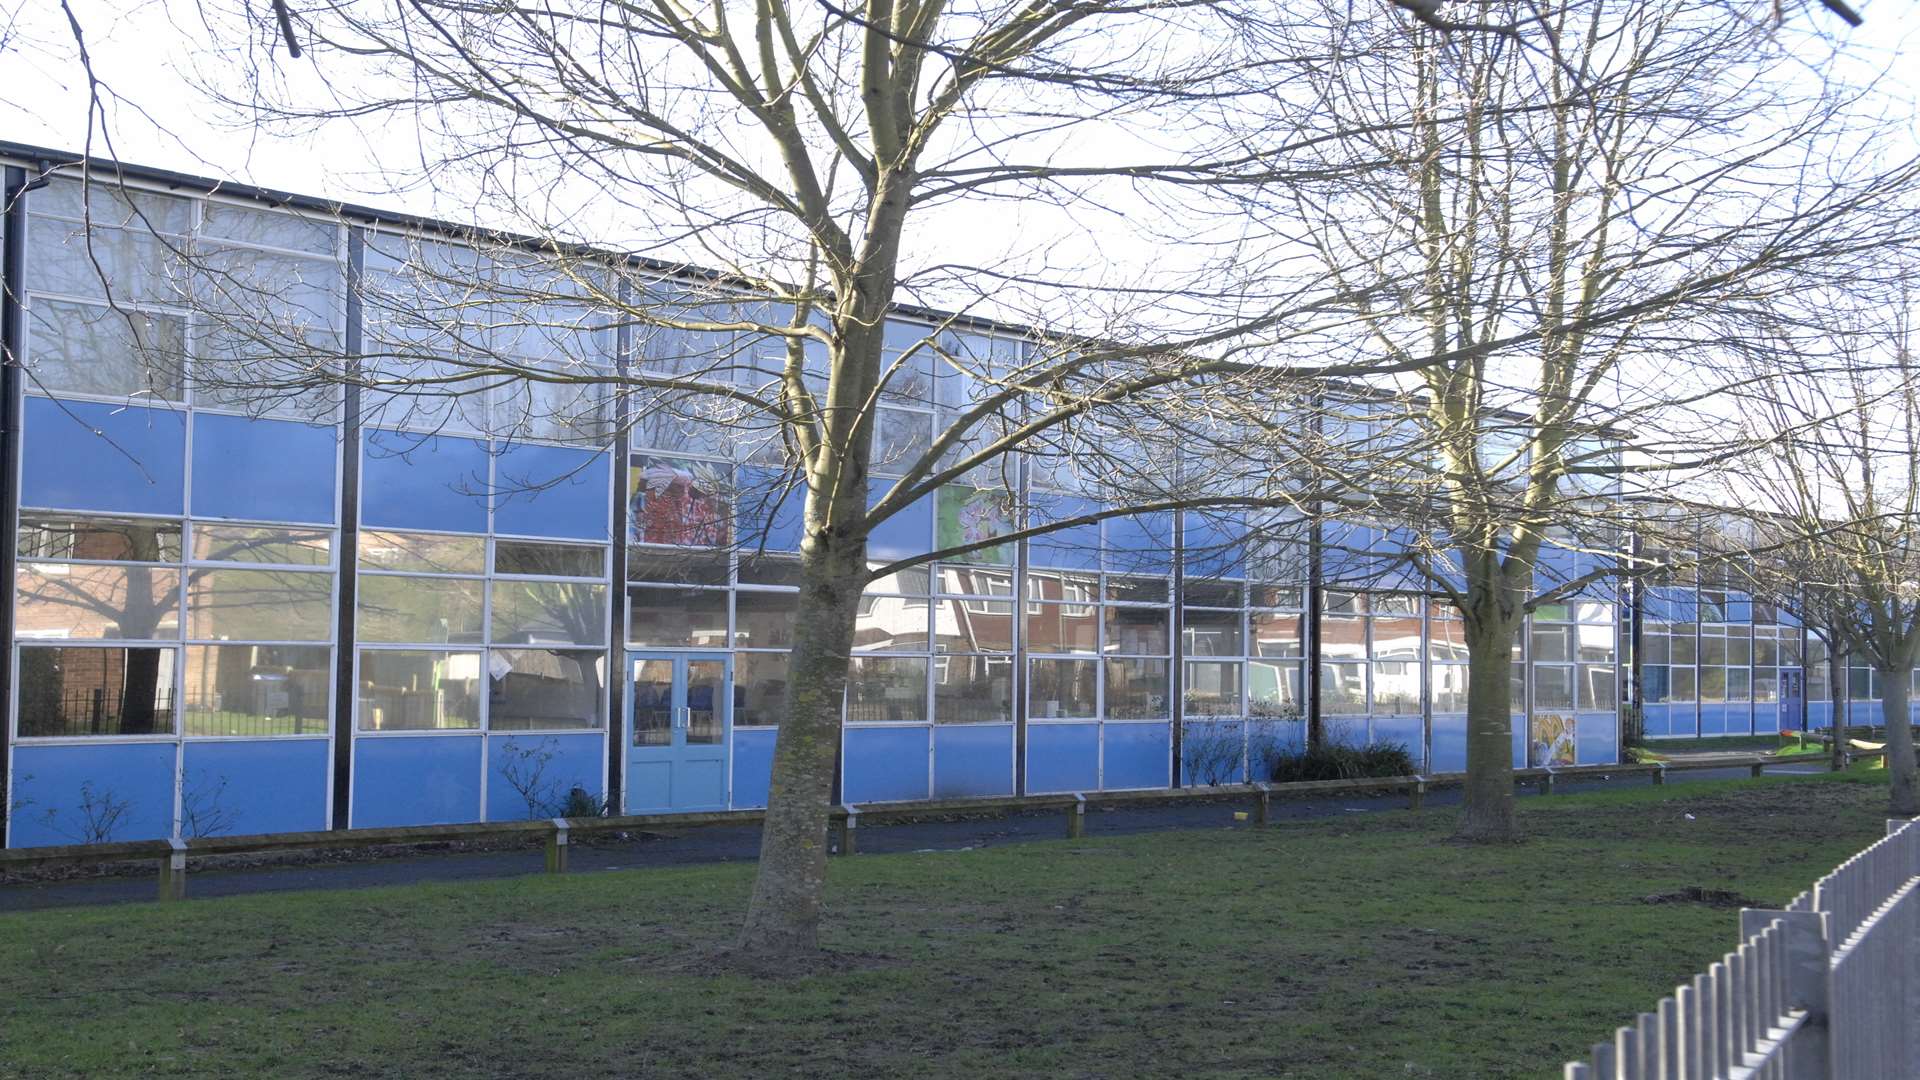 The site could be used for a future secondary school